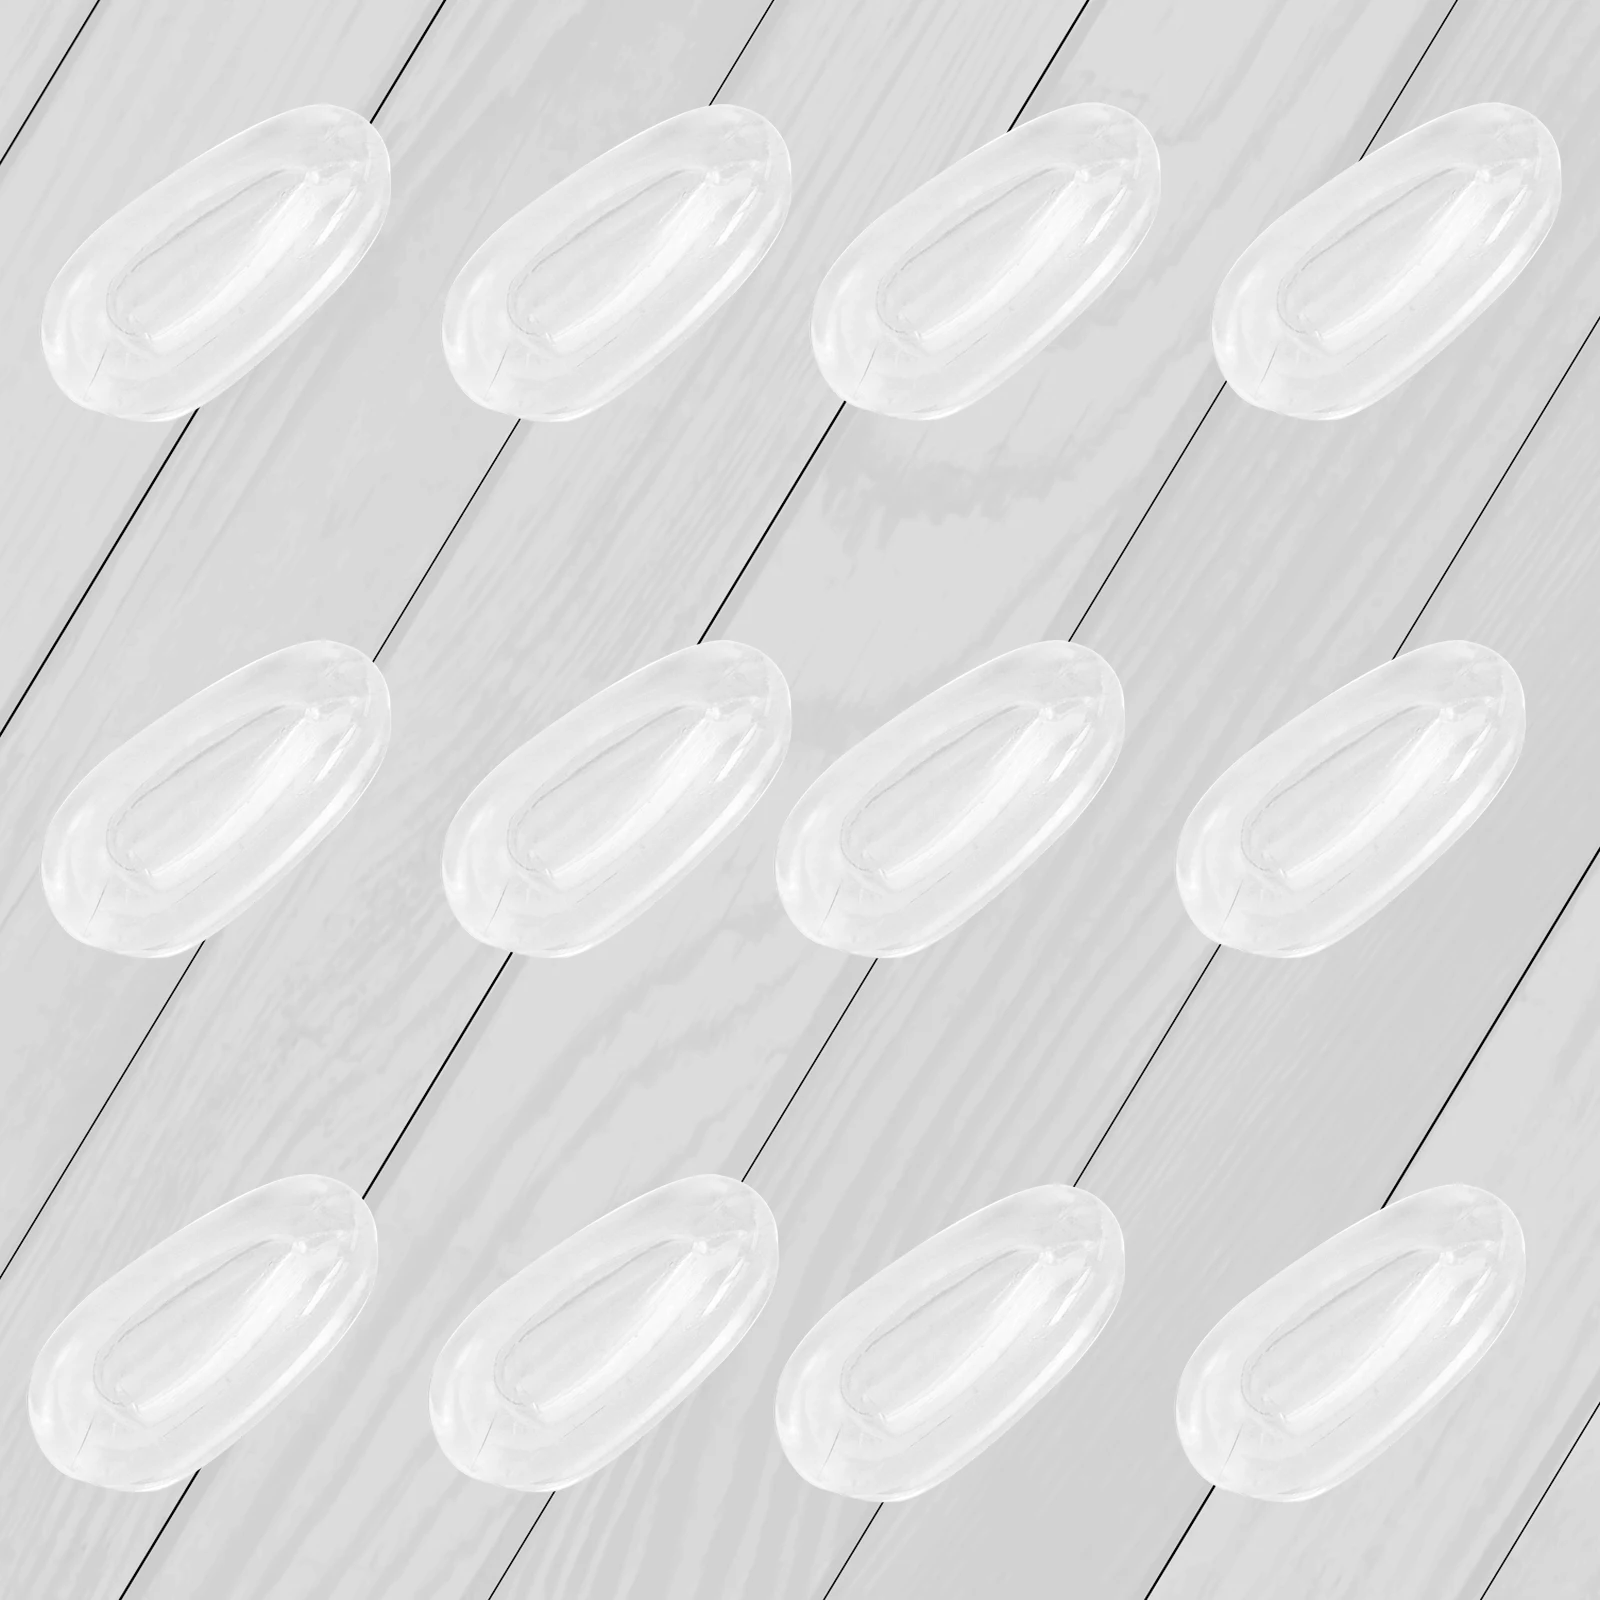 E.O.S Silicon Rubber Replacement Clear Nose Pads for OAKLEY Titanium Crosshair OO6014 Frame Multi-Options